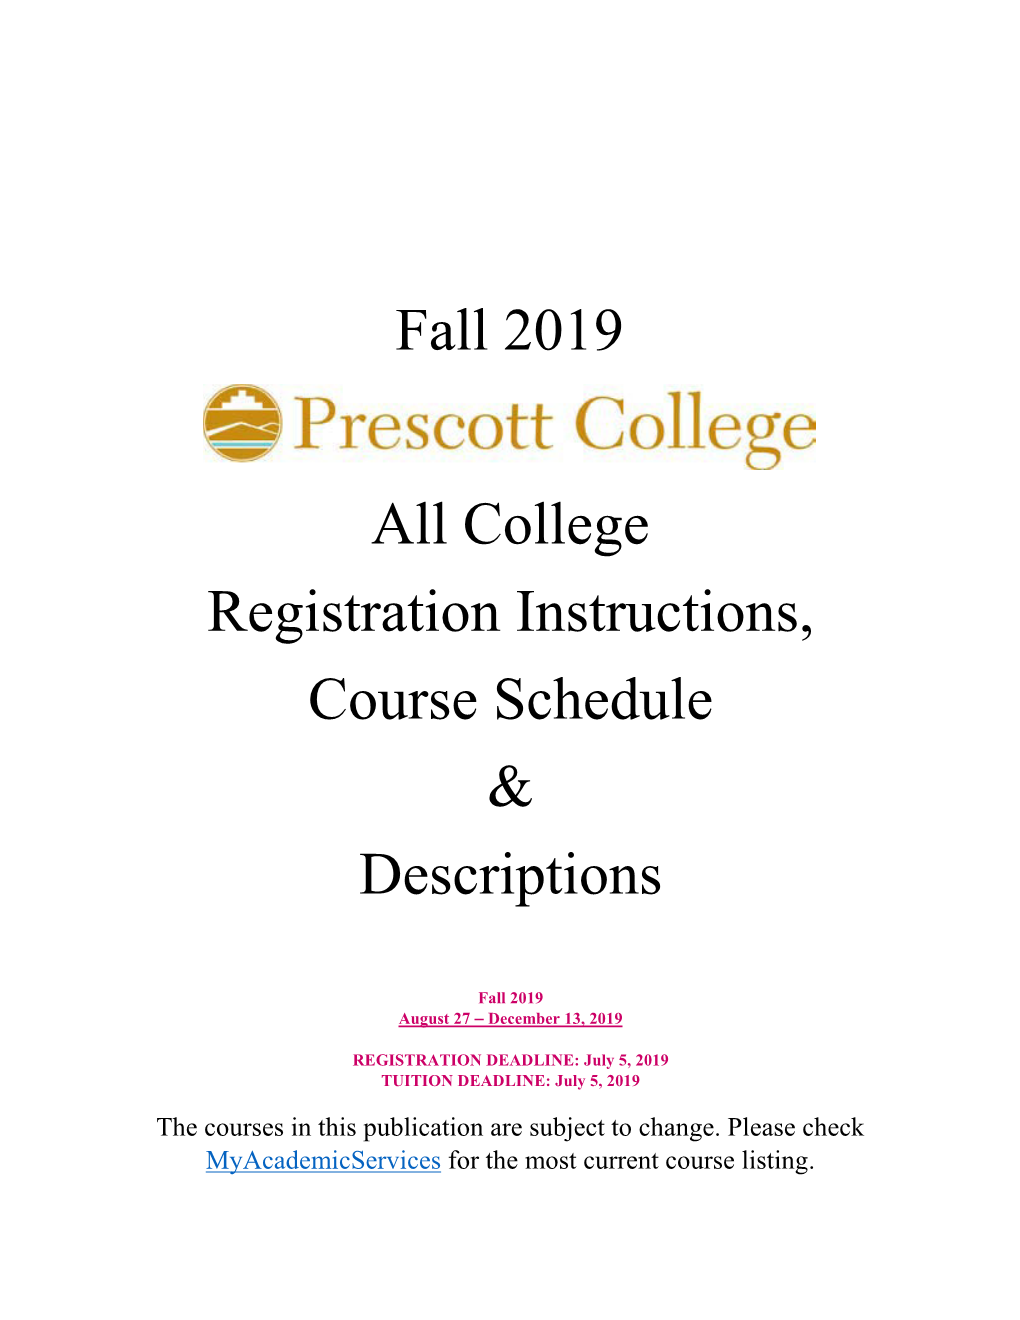 Fall 2019 All College Registration Instructions, Course Schedule & Descriptions